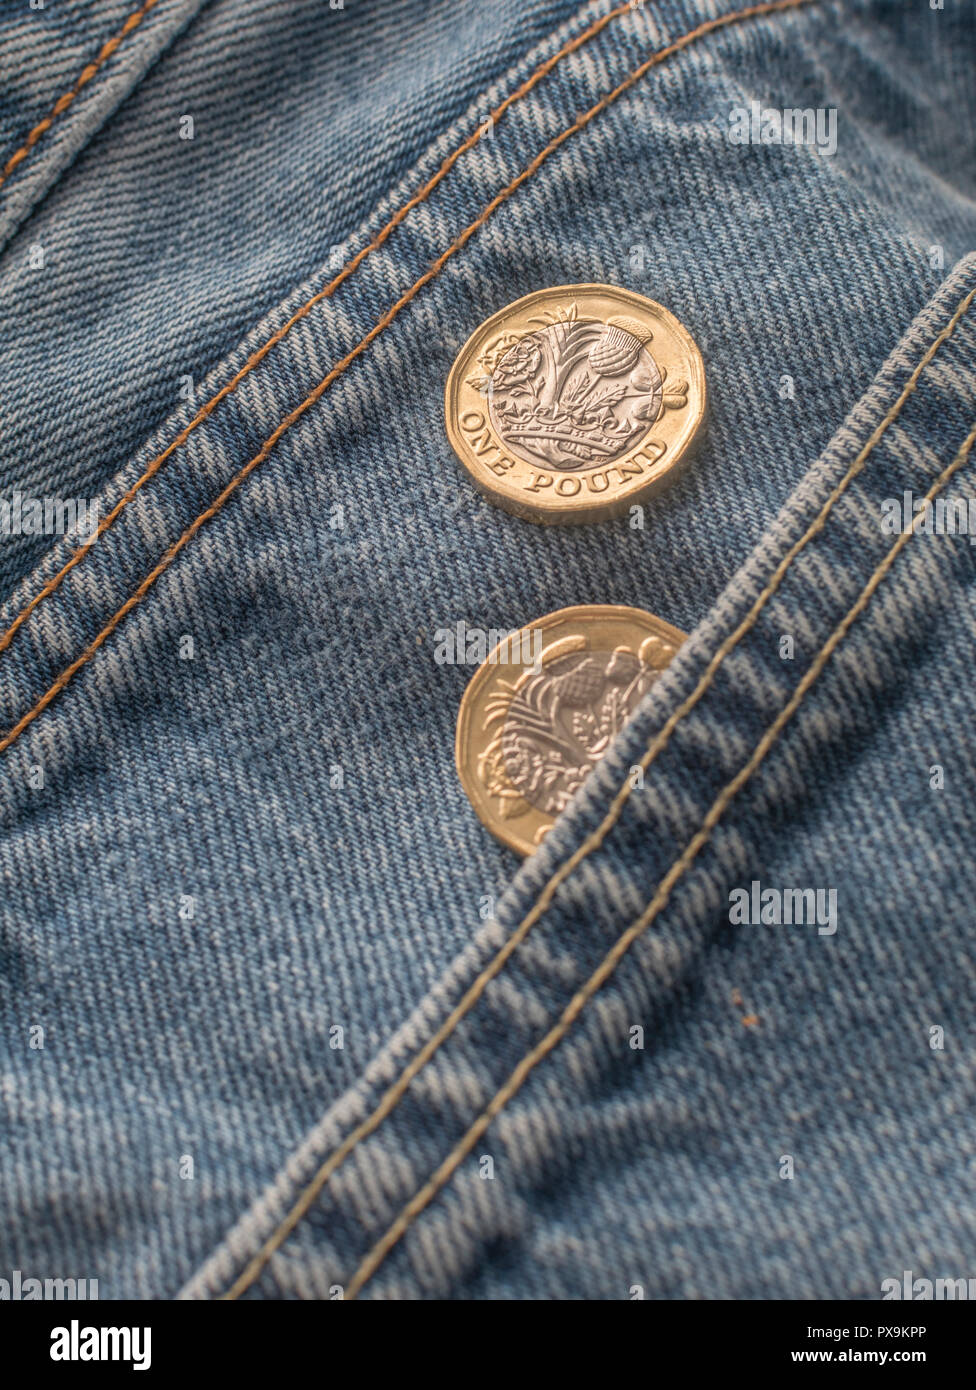 New Pound coin and trouser pocket. Metaphor for 'The Pound in Your Pocket' or pocket change, UK wages concept, Pound Sterling, last pound in pocket. Stock Photo